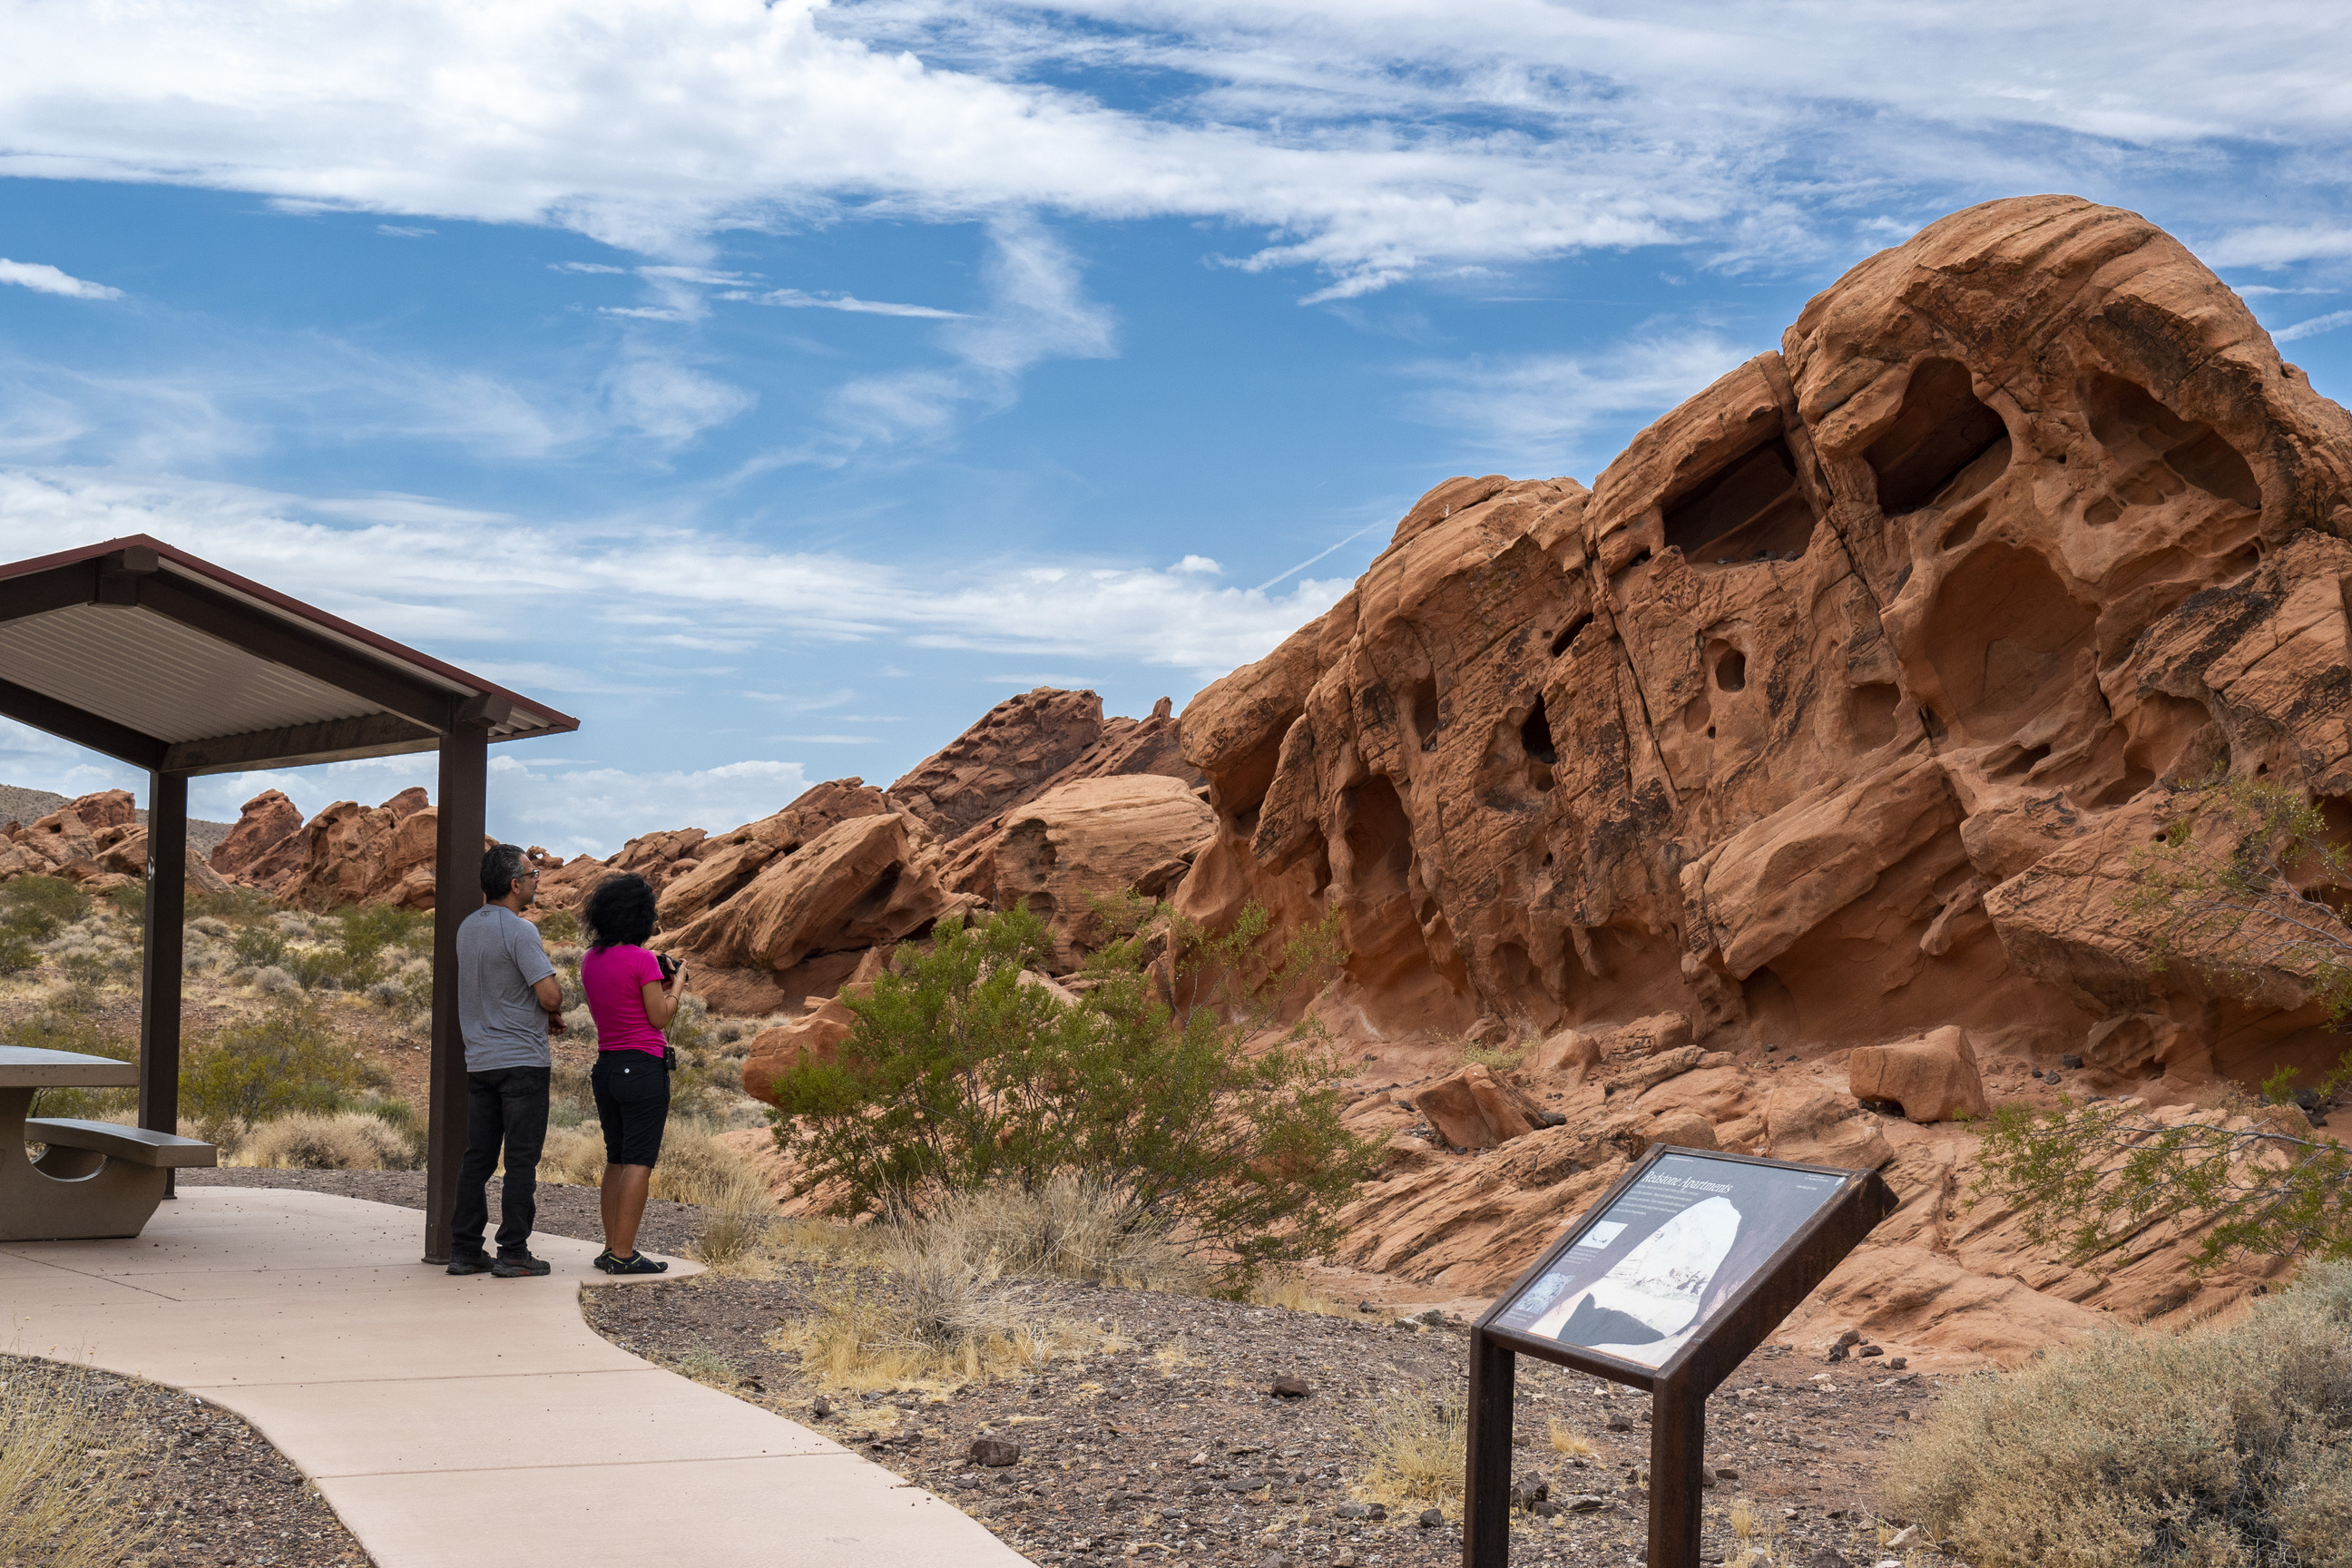 hikers at lower left stand near picnic shelter and educational wayside sign, large sandstone geologic formation to center and right, cloudy sky behind